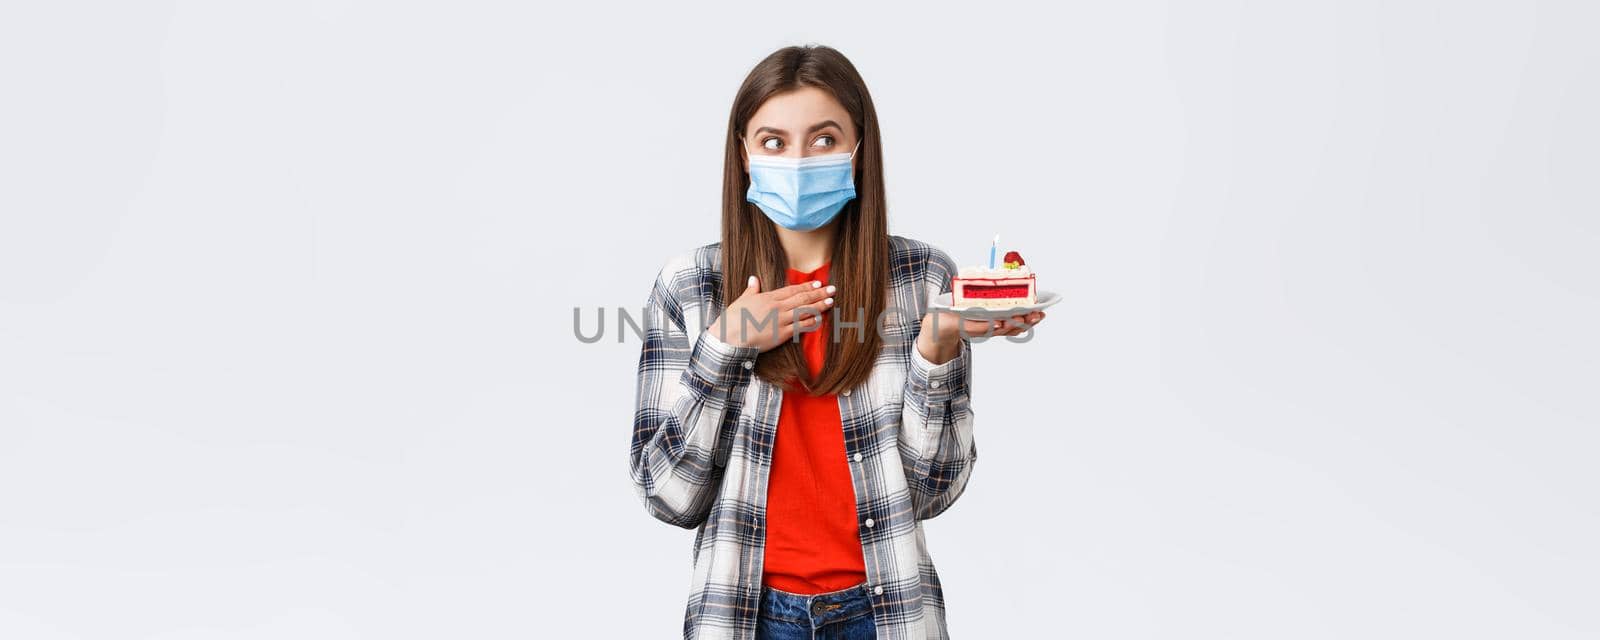 Coronavirus outbreak, lifestyle during social distancing and holidays celebration concept. Dreamy happy young girl in medical mask celebrating birthday, hold b-day cake, think what wish by Benzoix